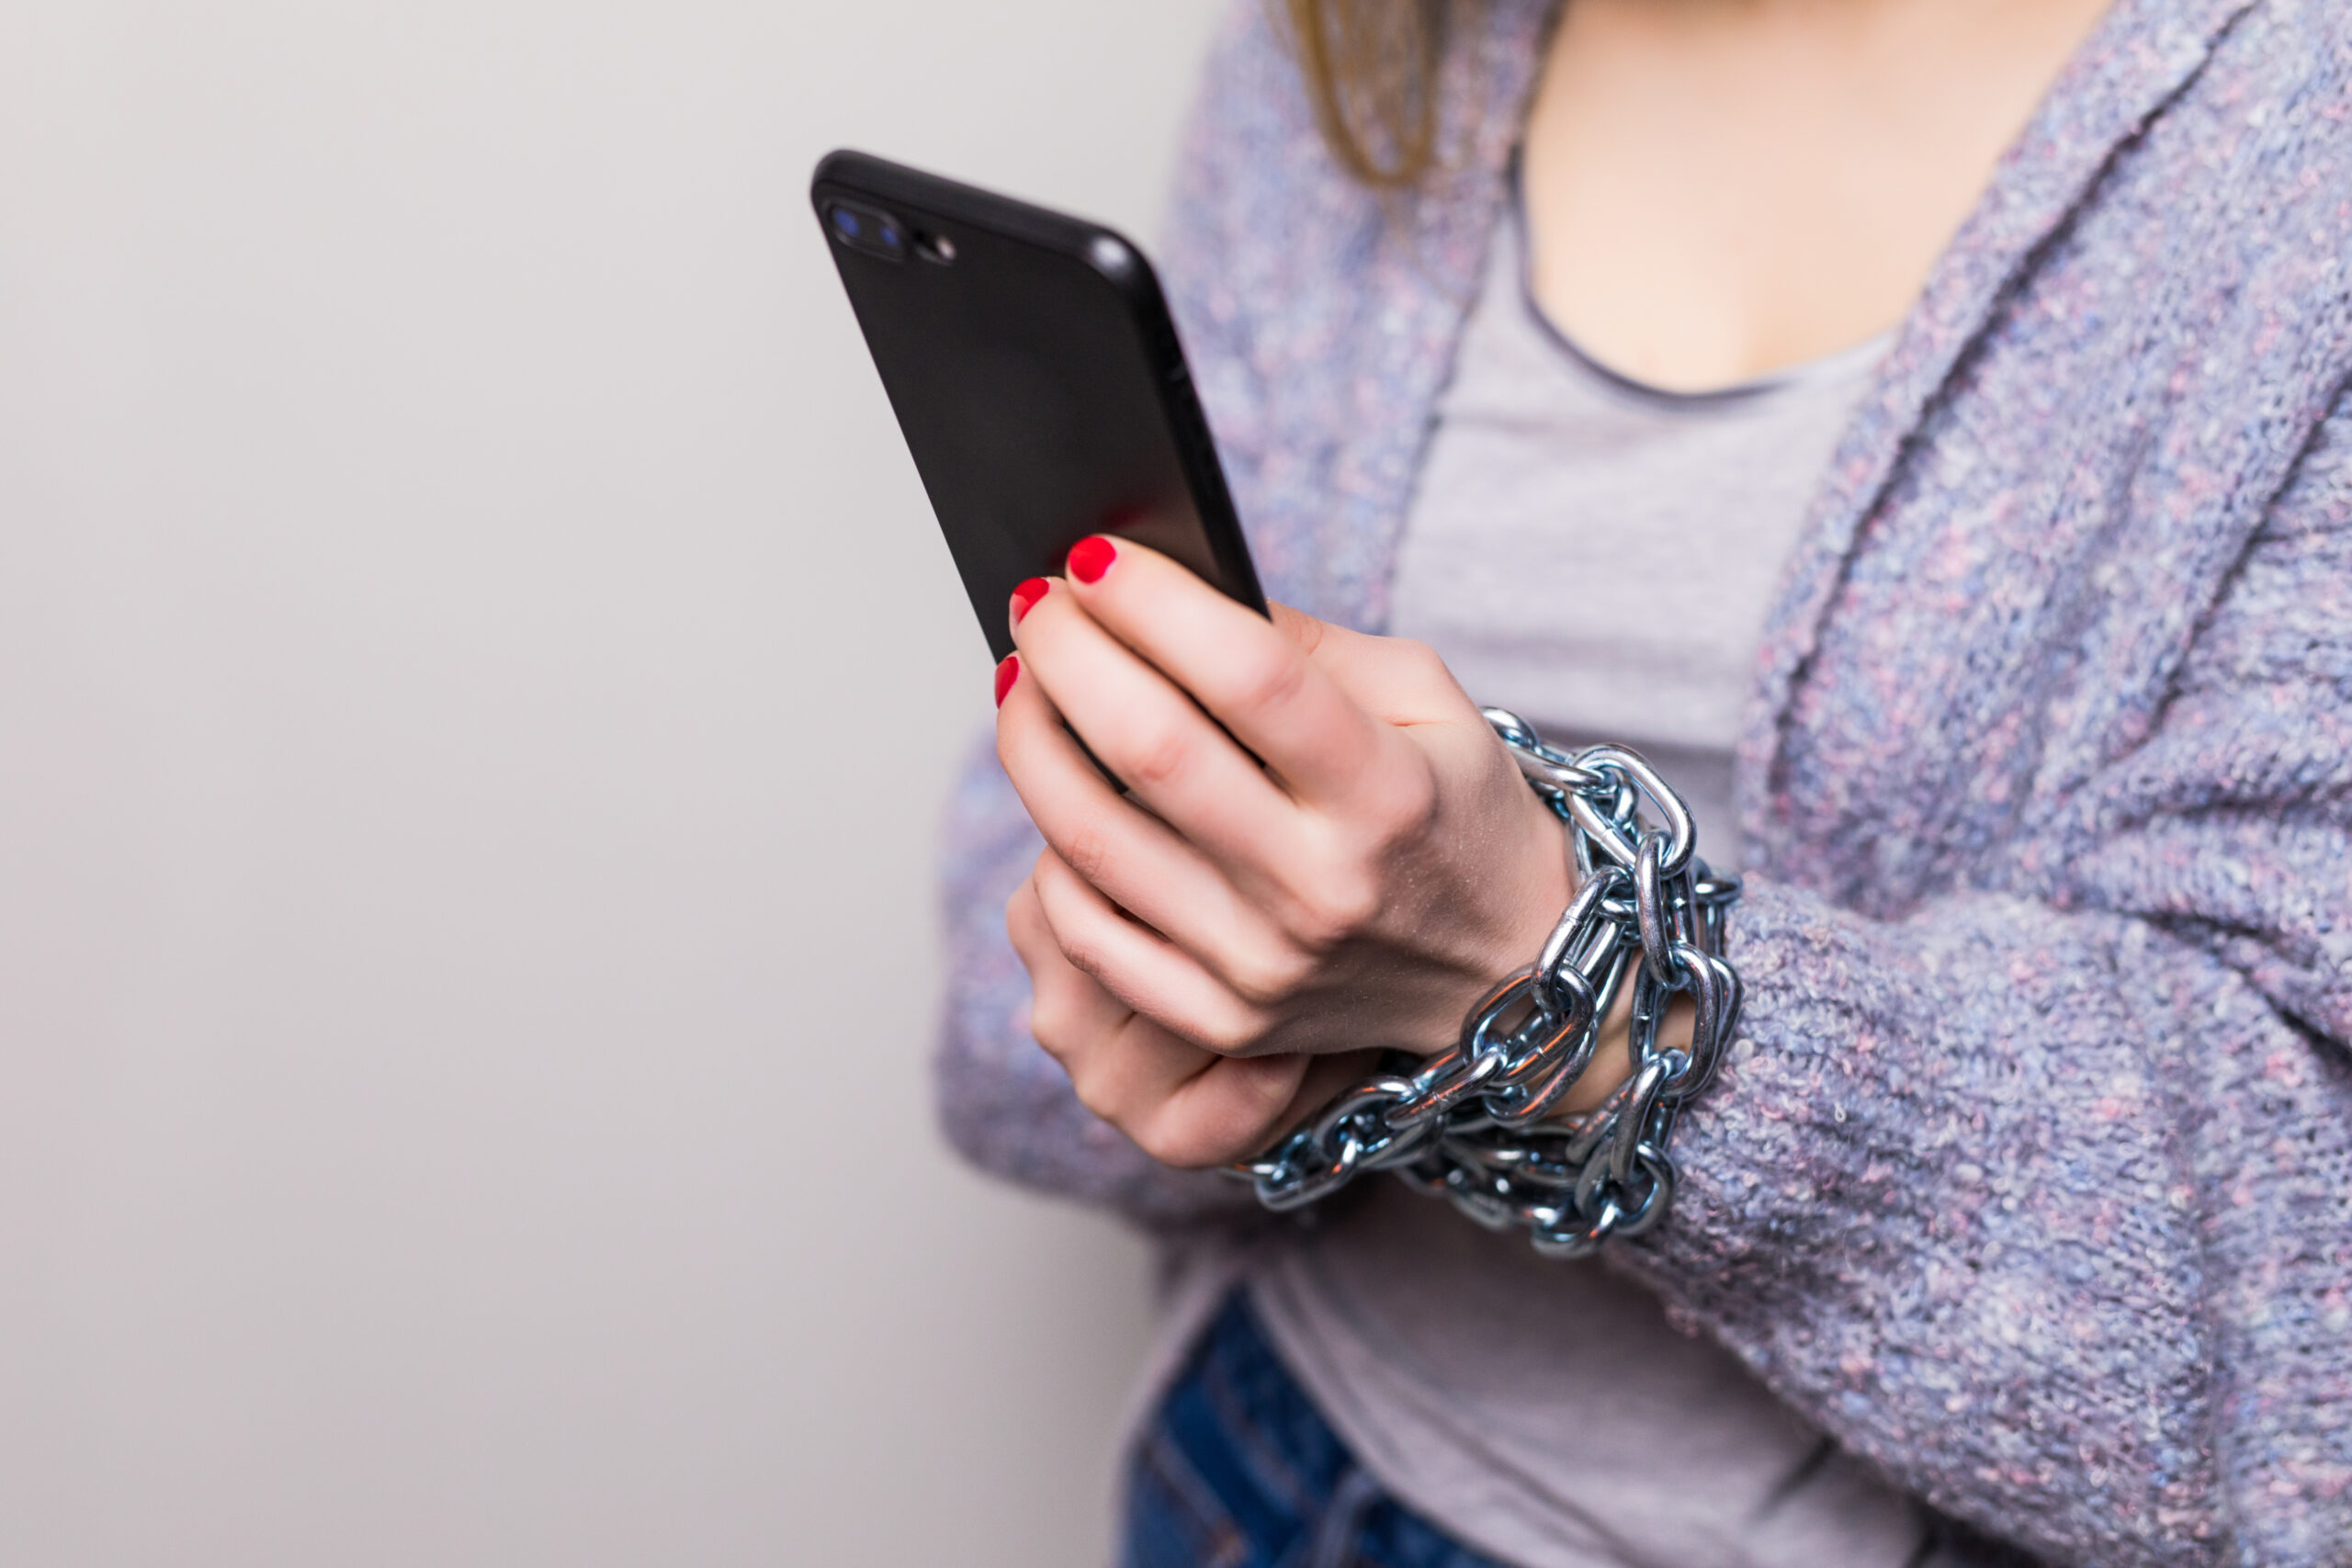 Girl with chain locked hands using a smartphone isolated on white background